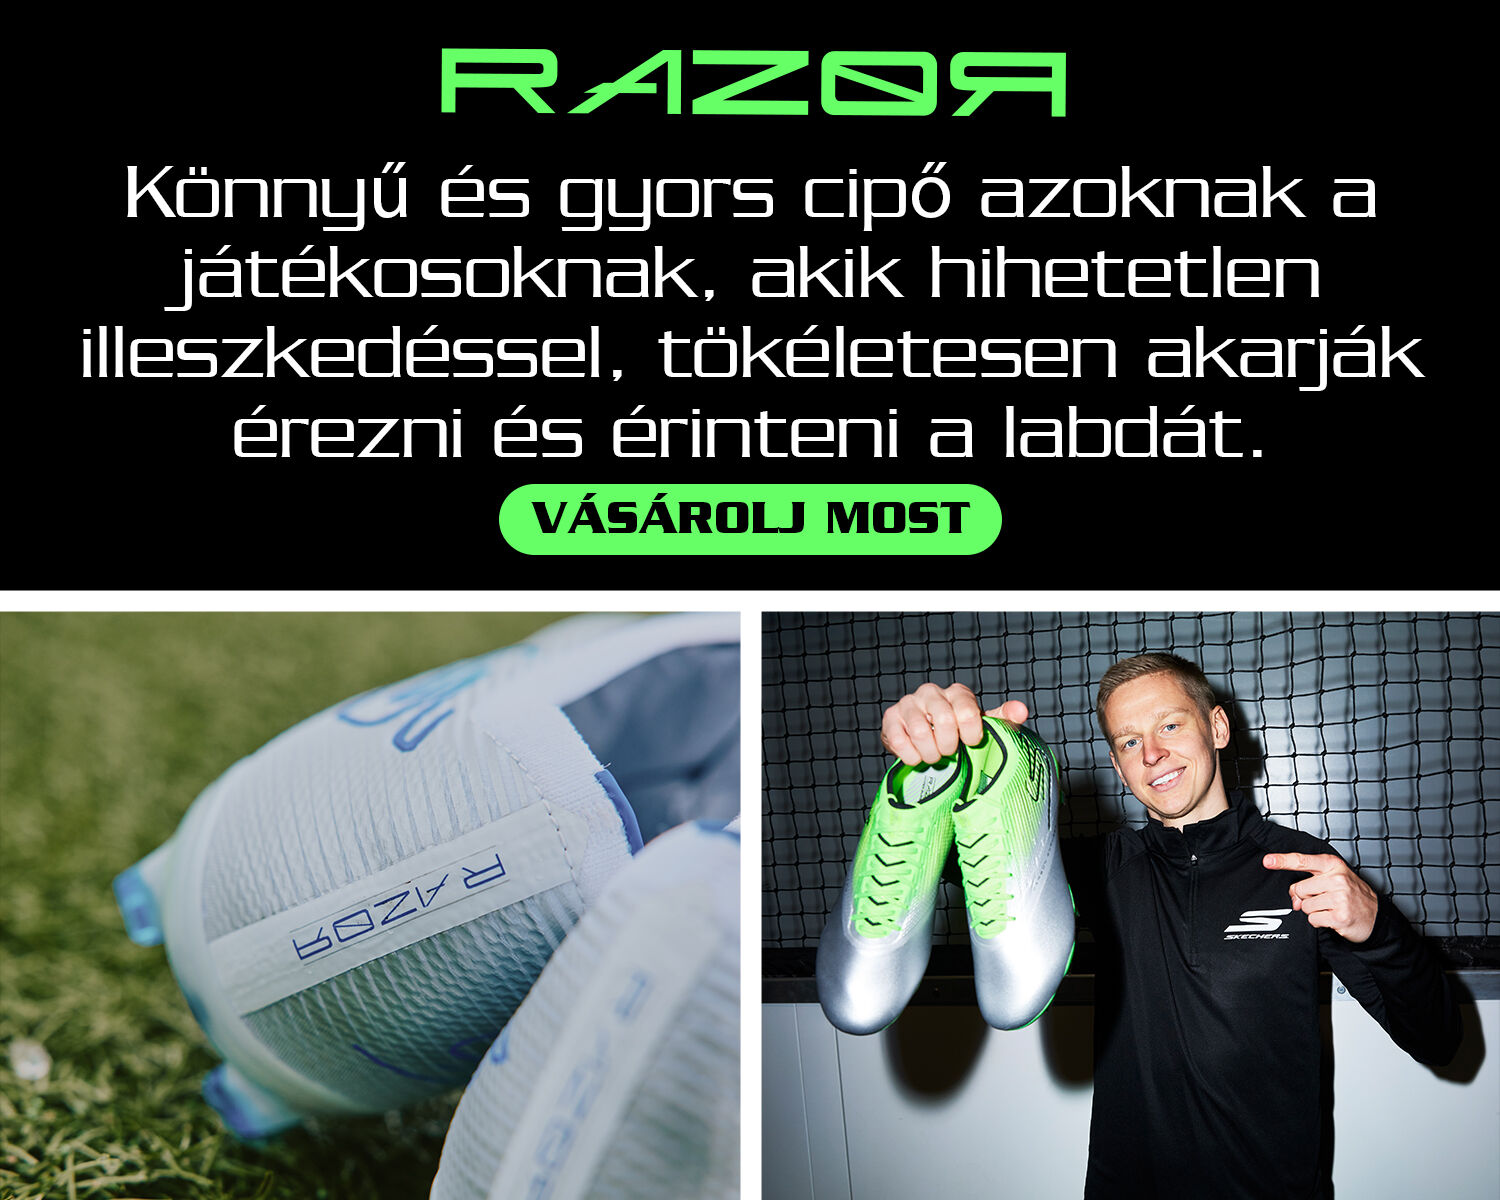 Razor. Lightweight speed boot for the player looking for amazing fit, feel and touch on the ball.